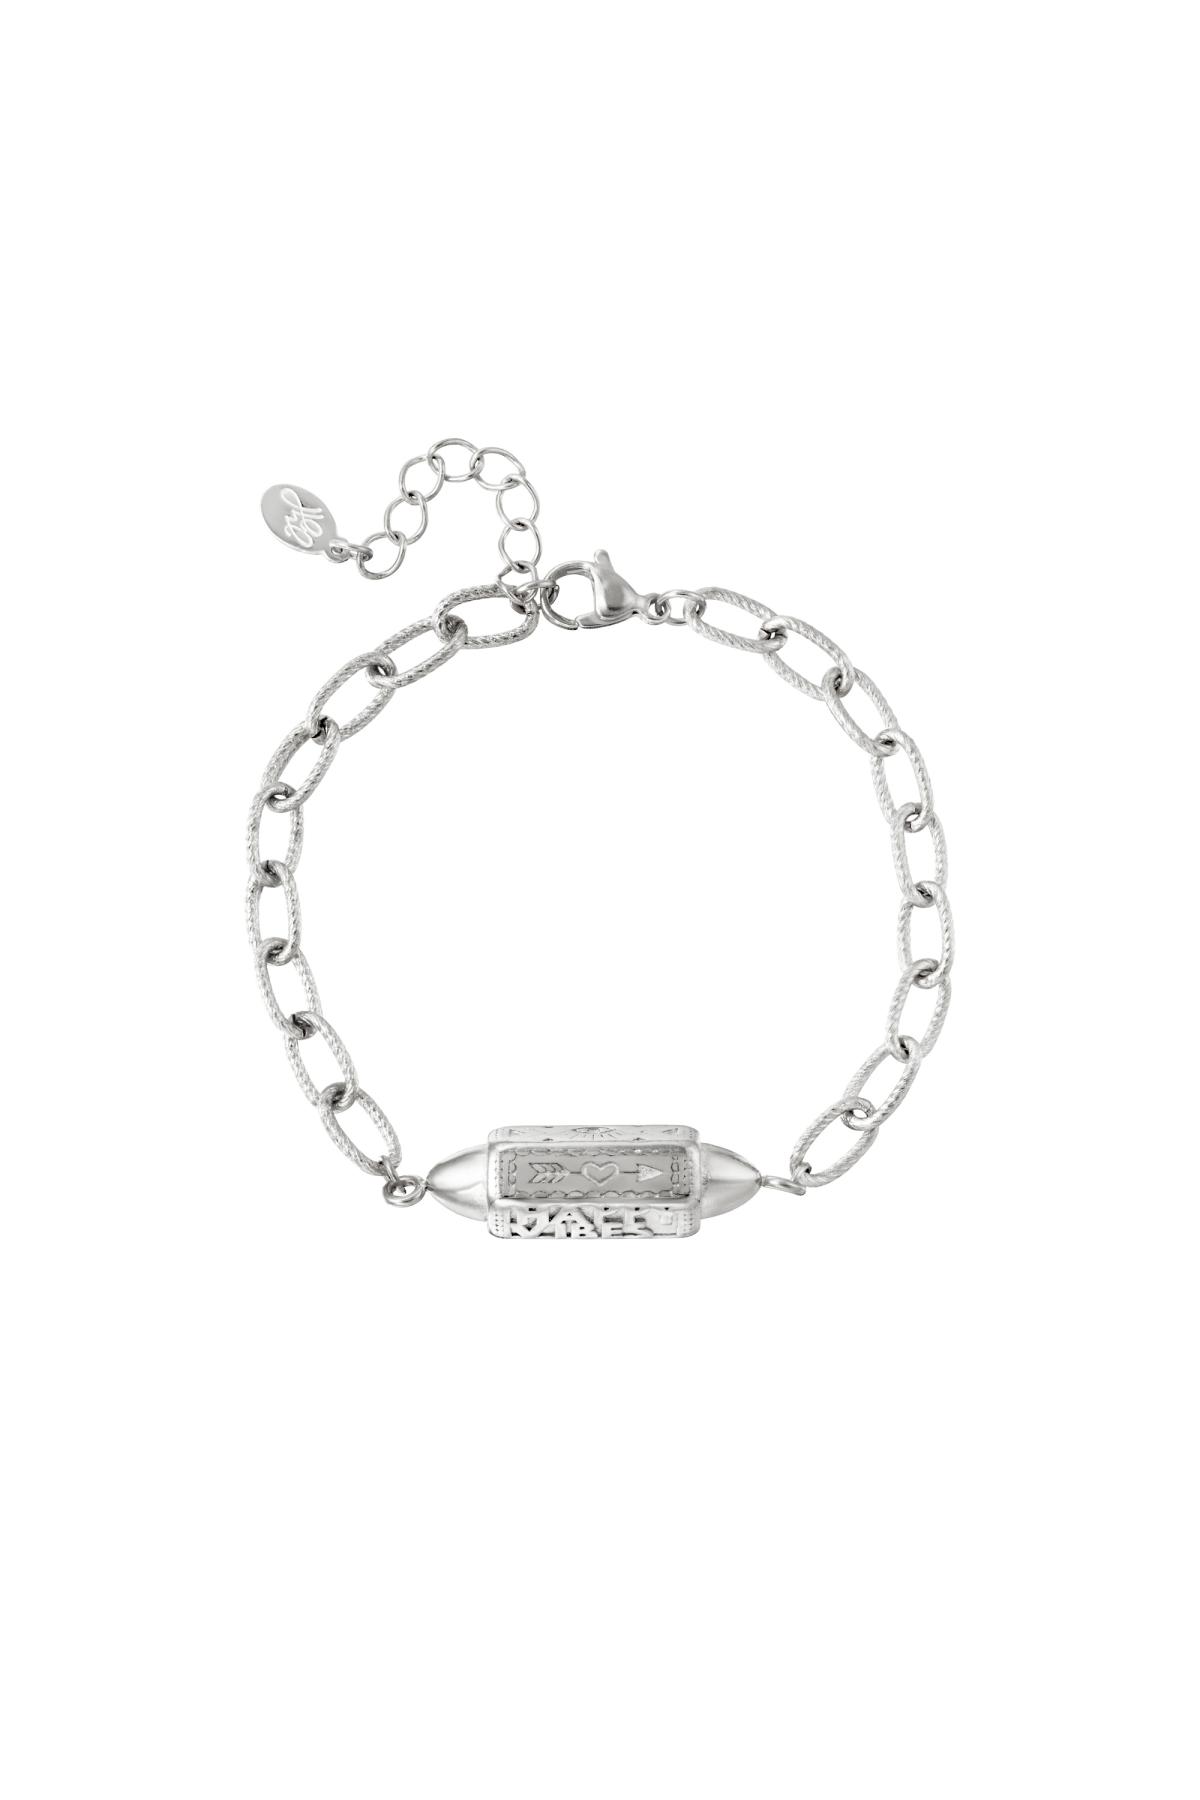 Bracelet Pendant Happy Vibes Silver Stainless Steel h5 